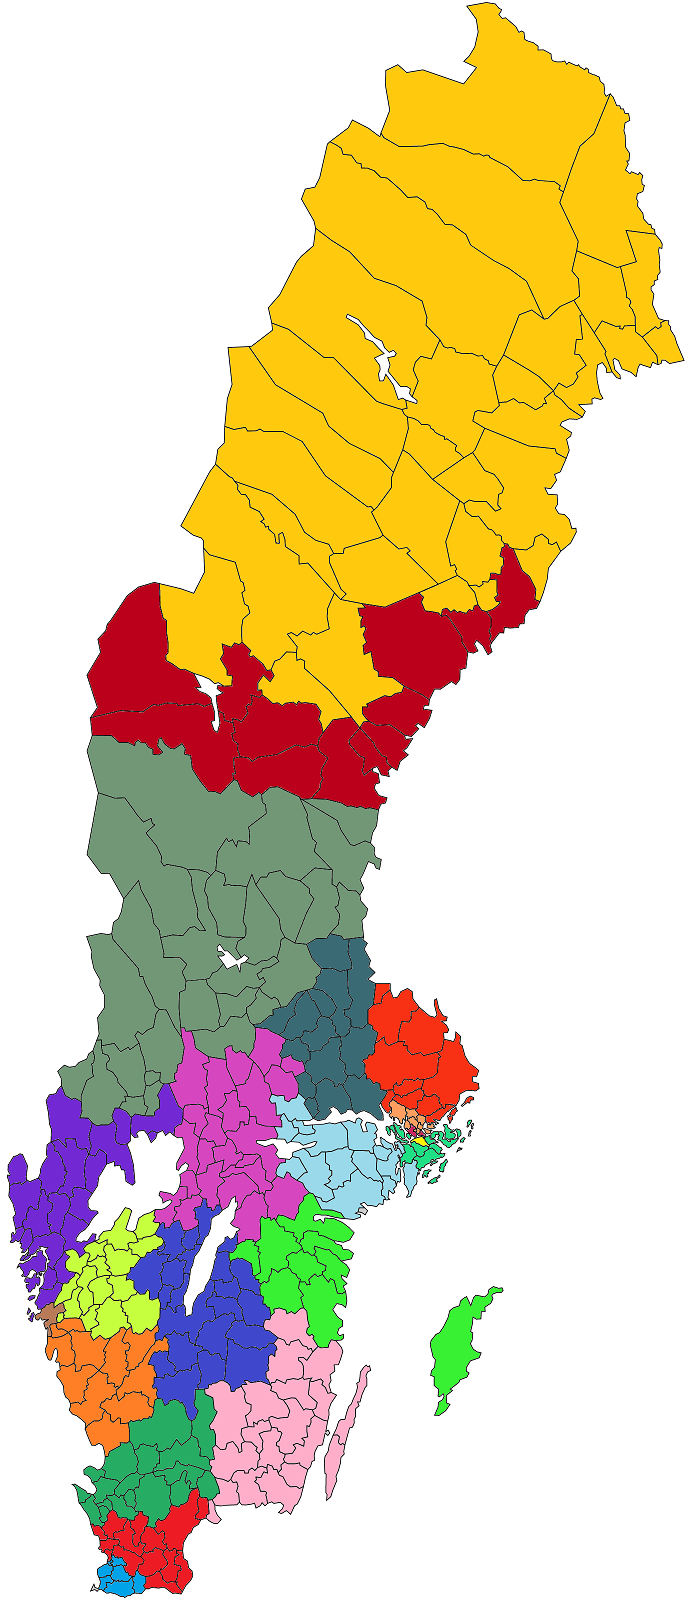 Sweden split into 21 regions with equal population - Maps on the Web